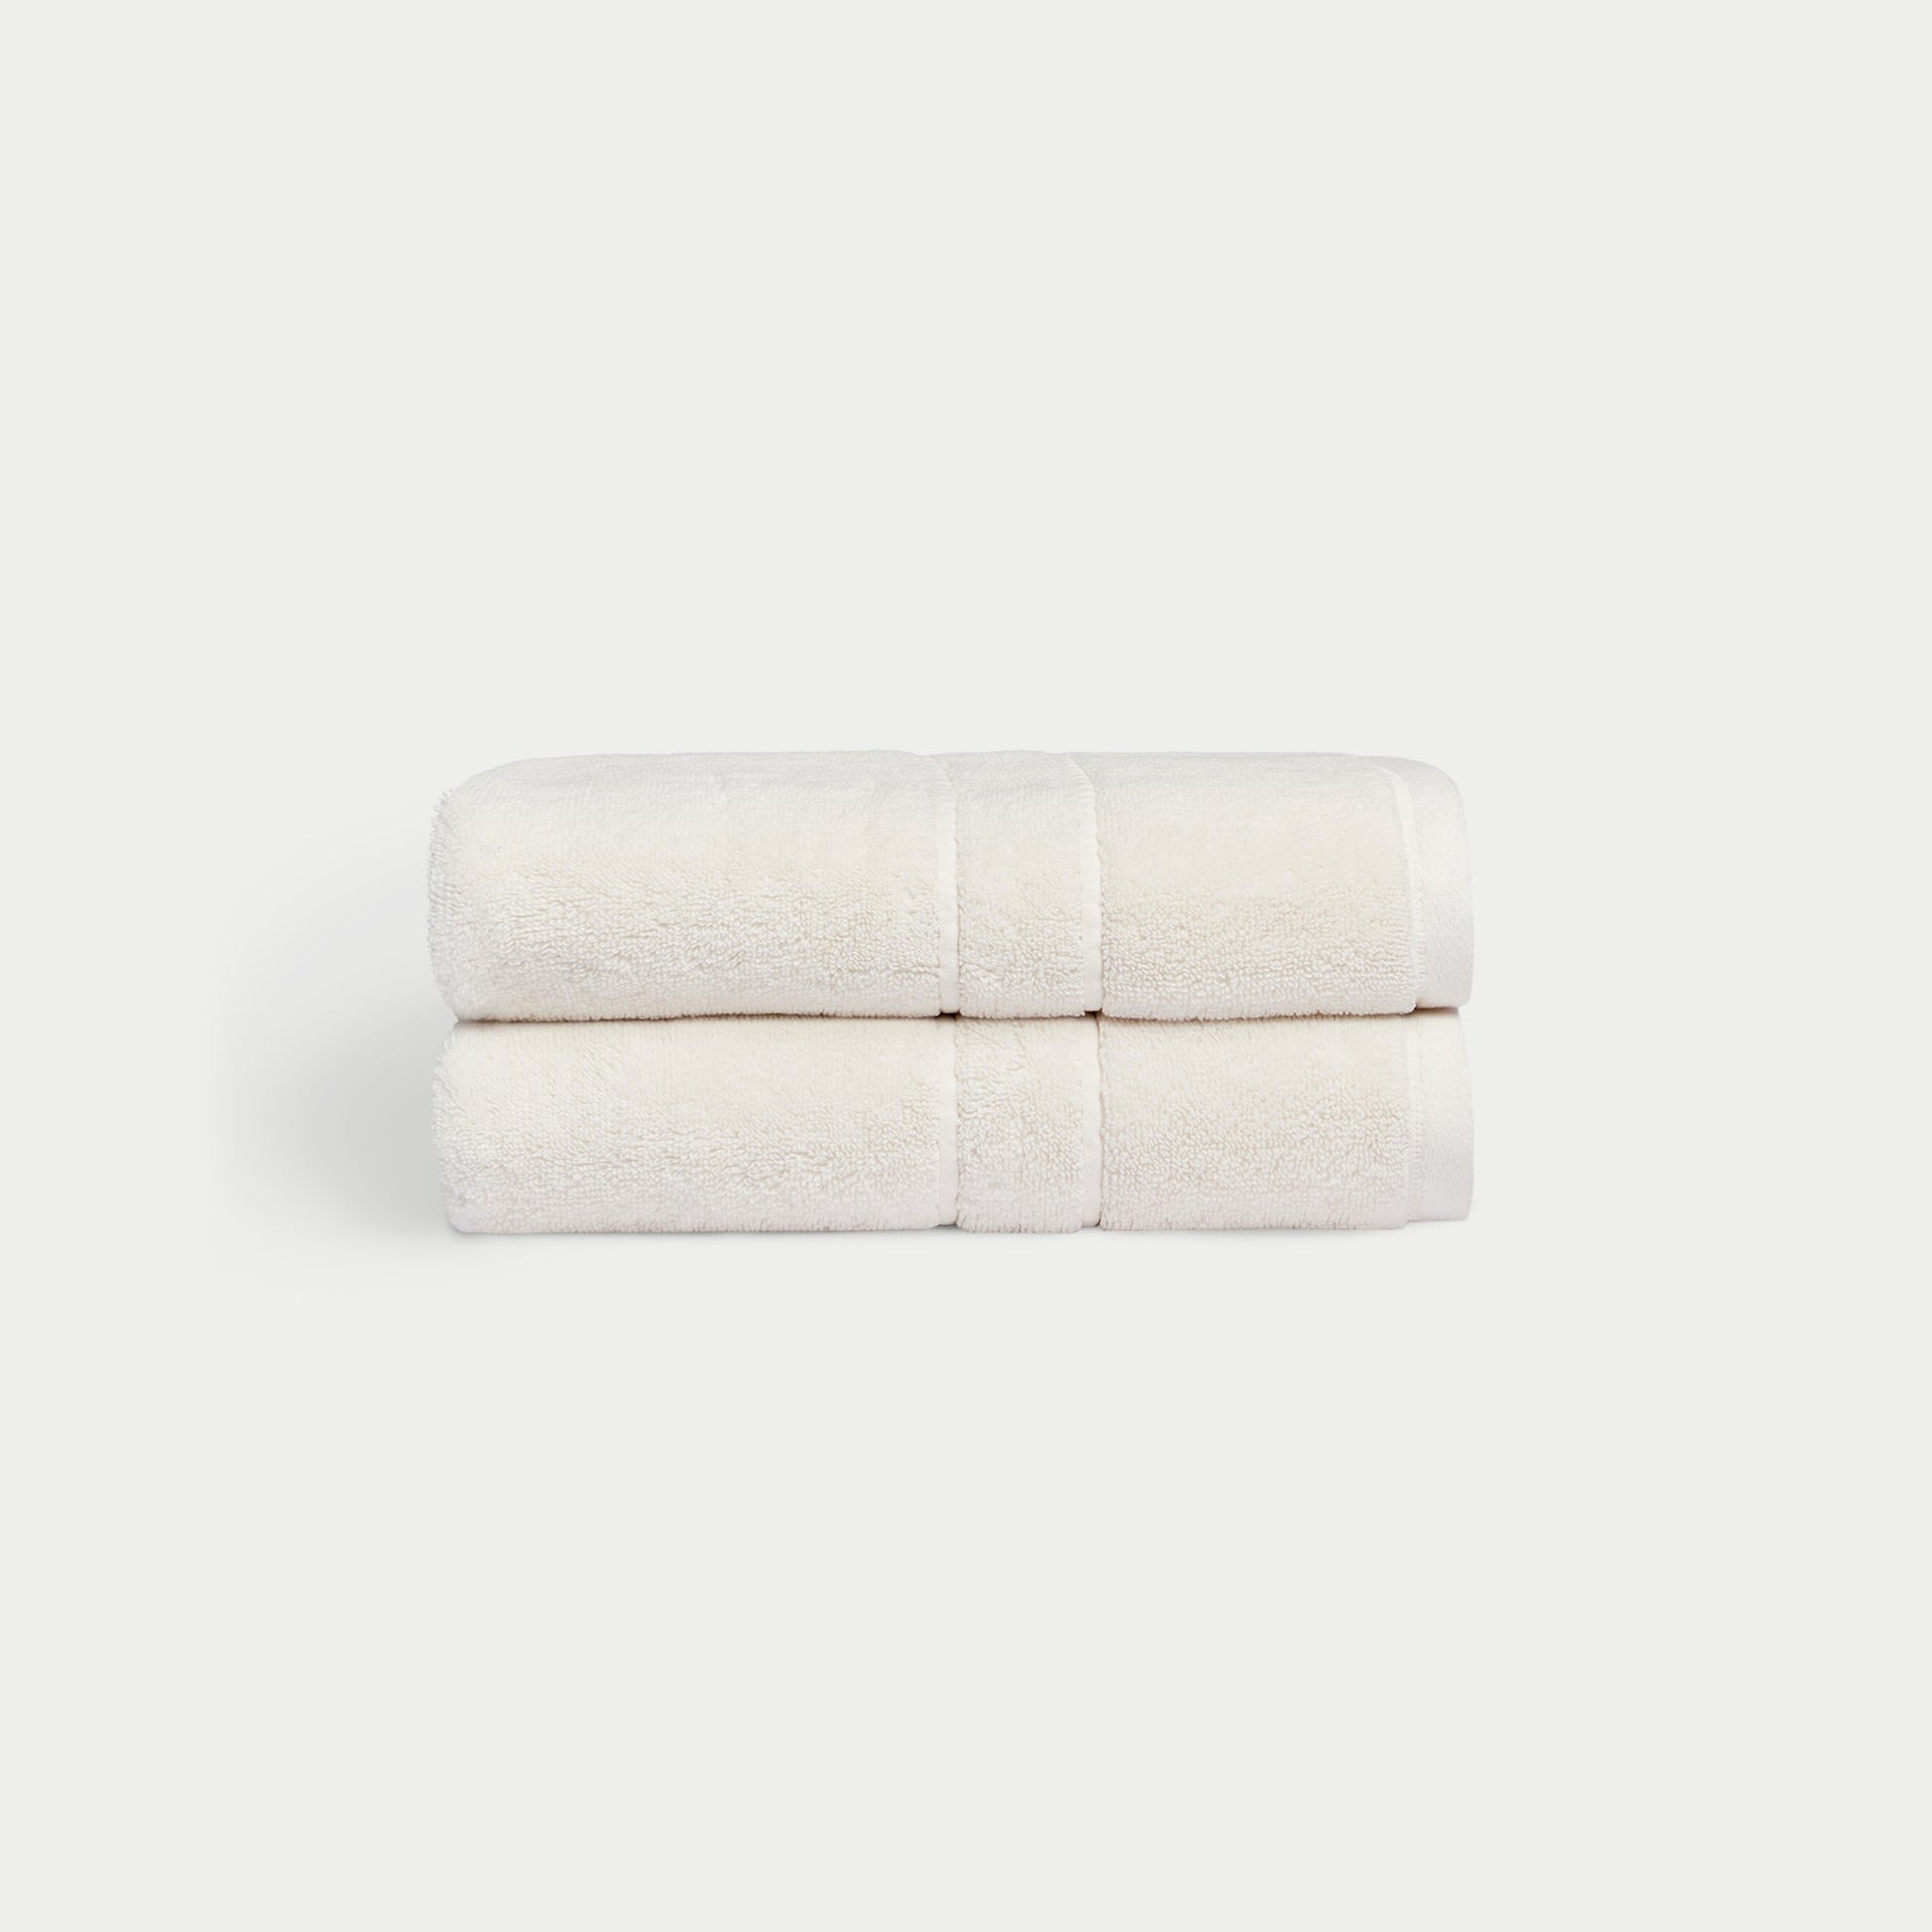 Premium Plush Hand Towels in the color Seashell. Photo of Complete Premium Plush Hand Towel taken with white background |Color:Seashell